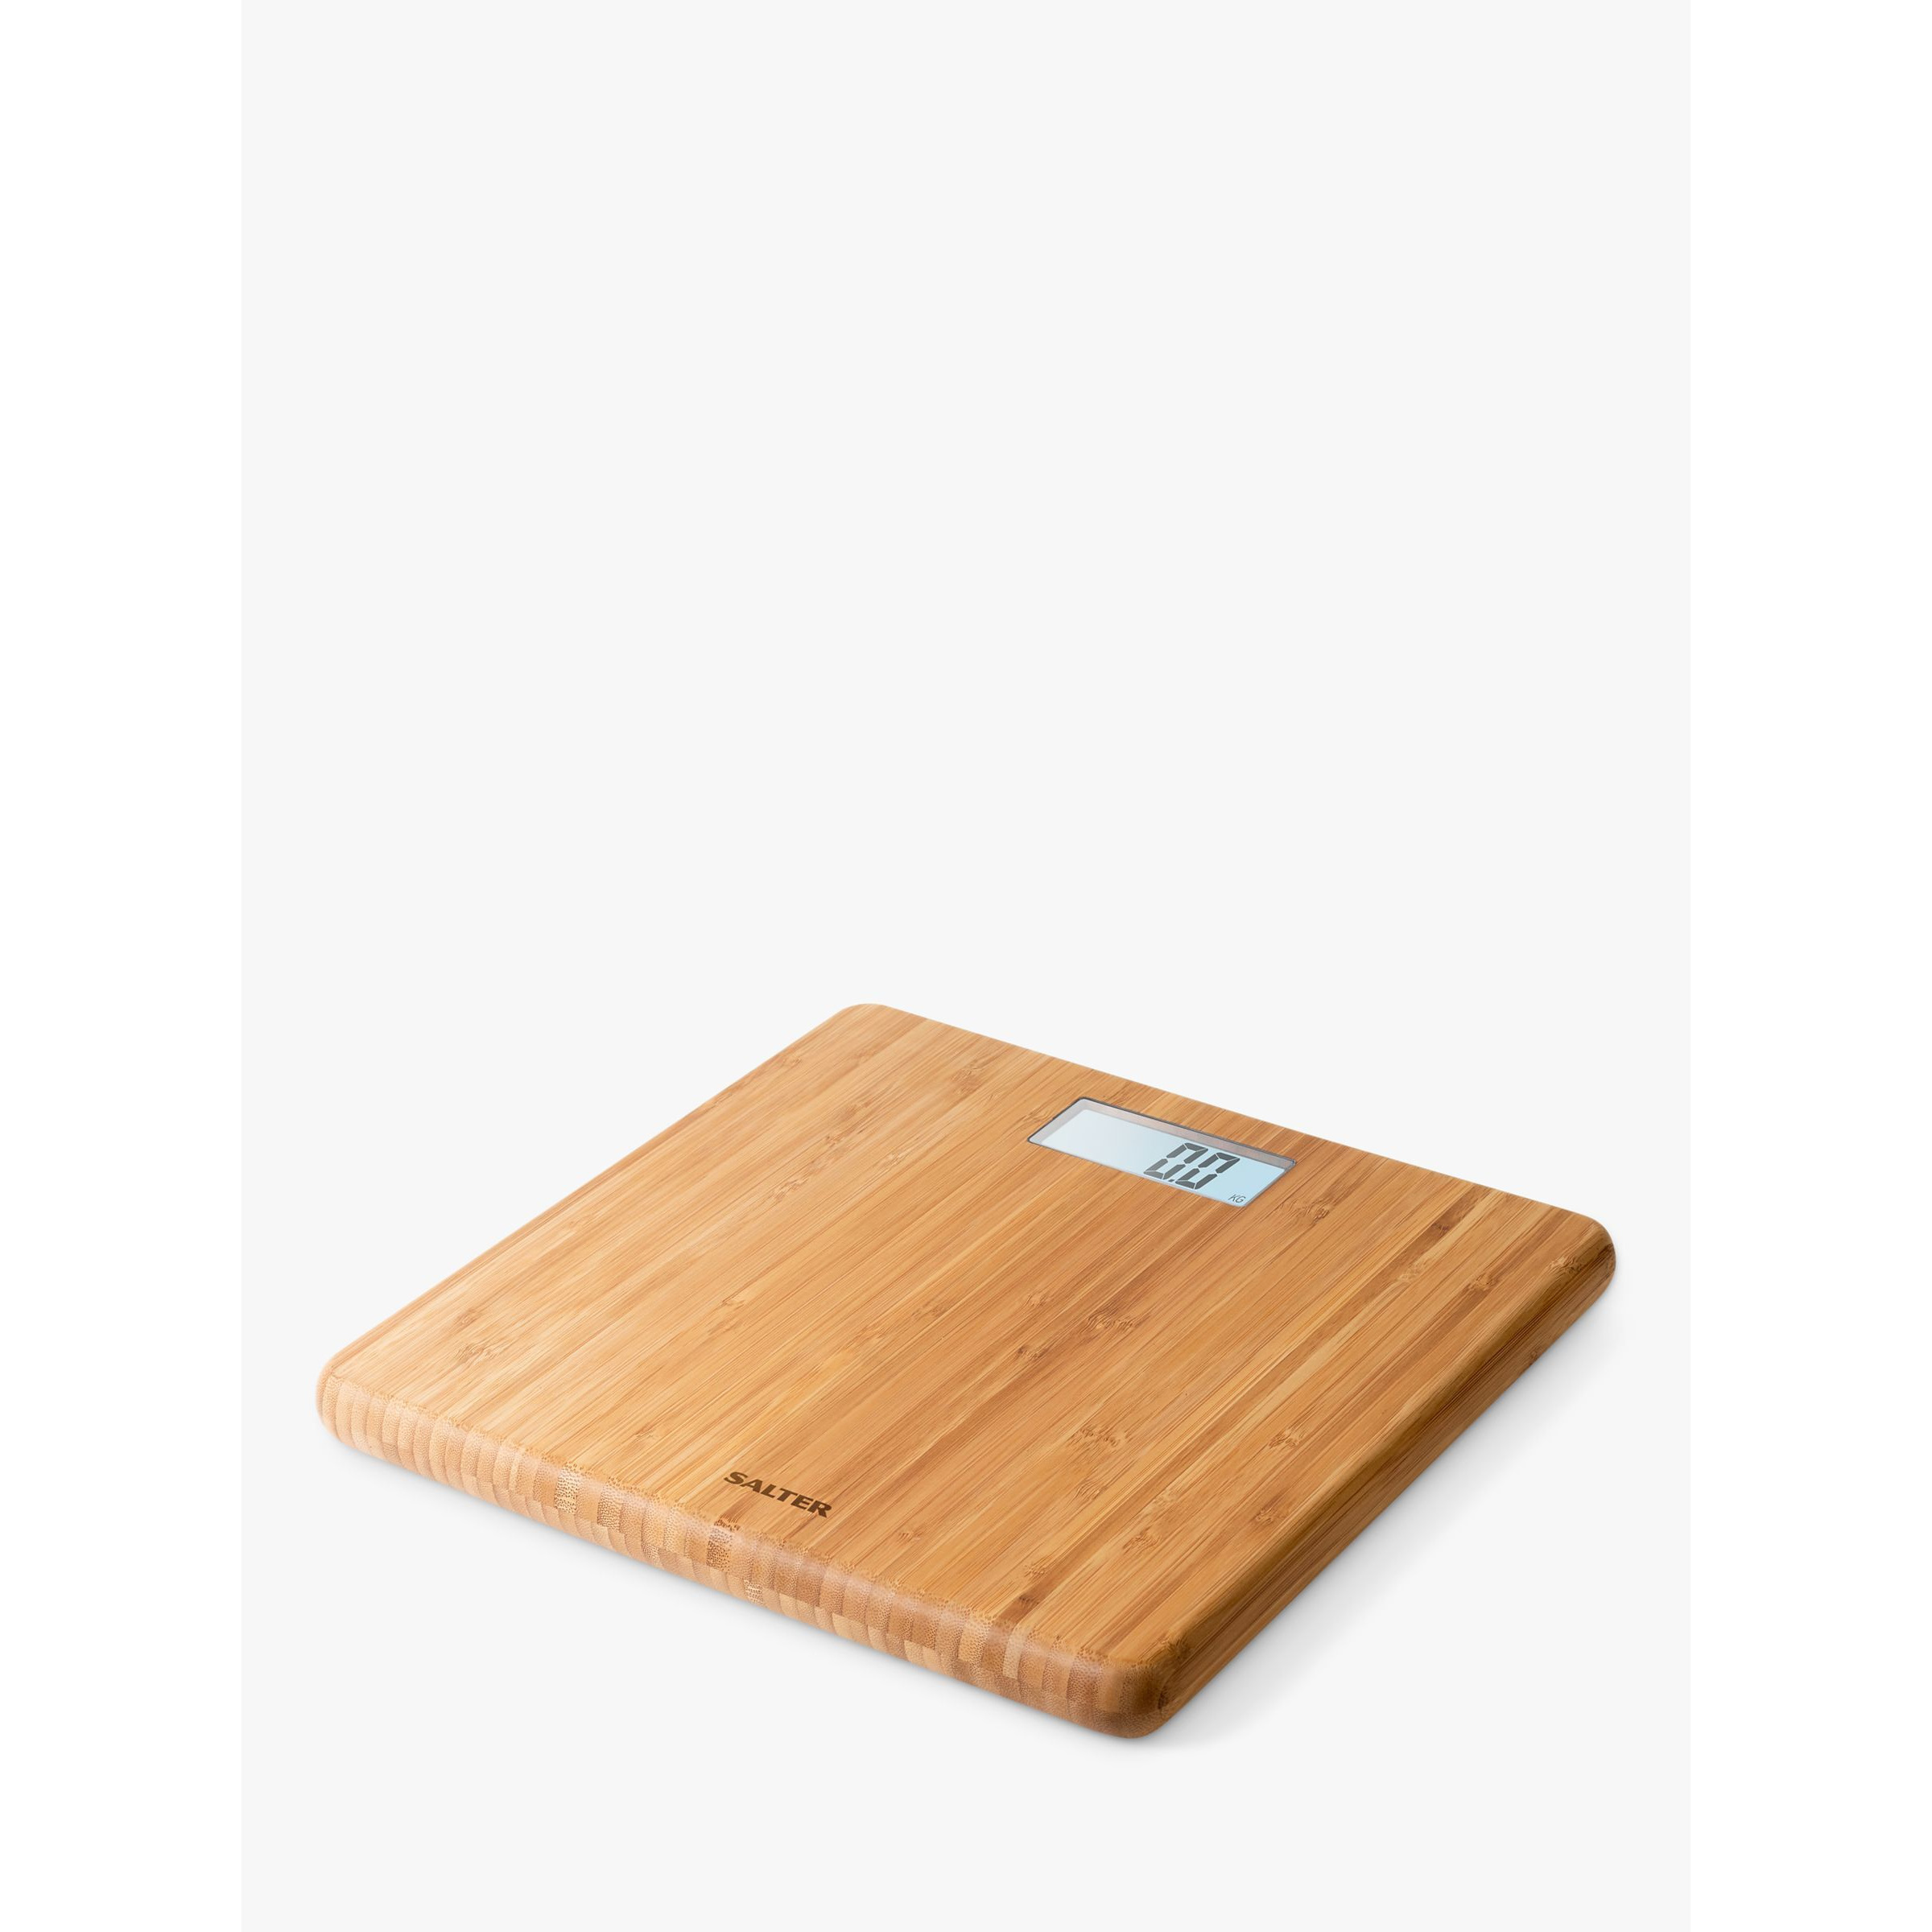 Salter FSC-Certified Bamboo Bathroom Scale, Natural - image 1